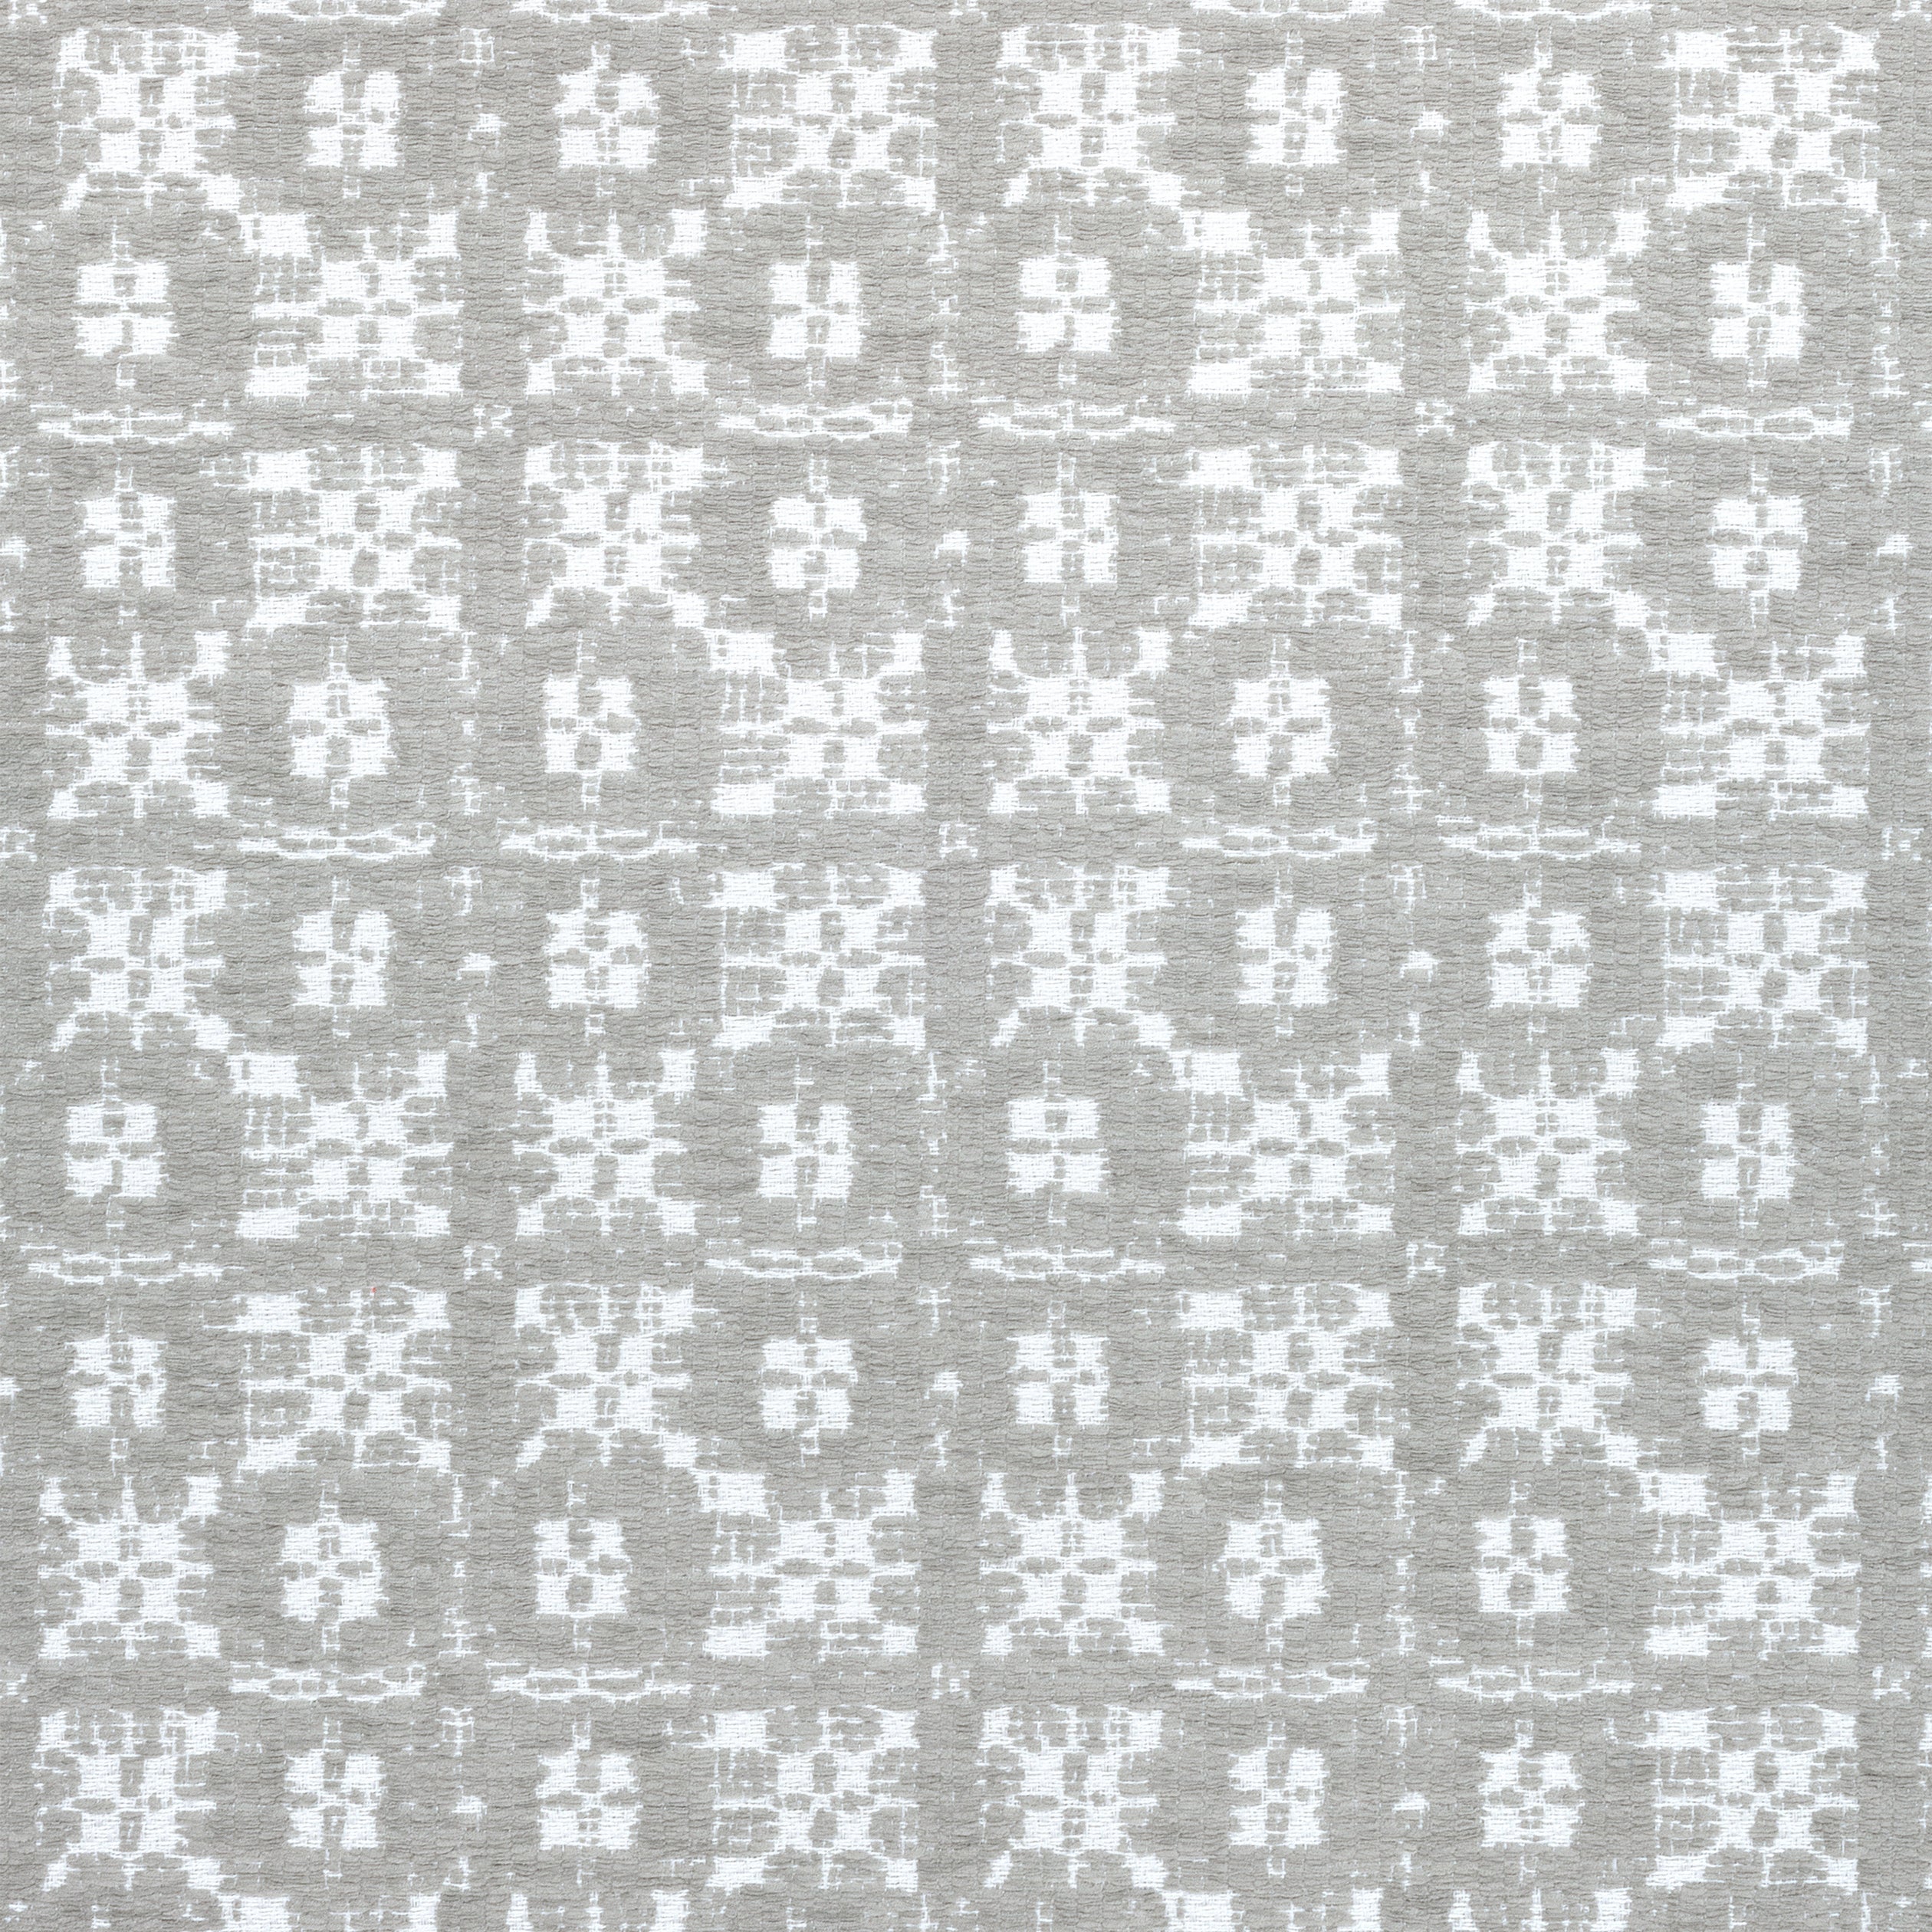 Brimfield fabric in nickel color - pattern number W73493 - by Thibaut in the Landmark collection